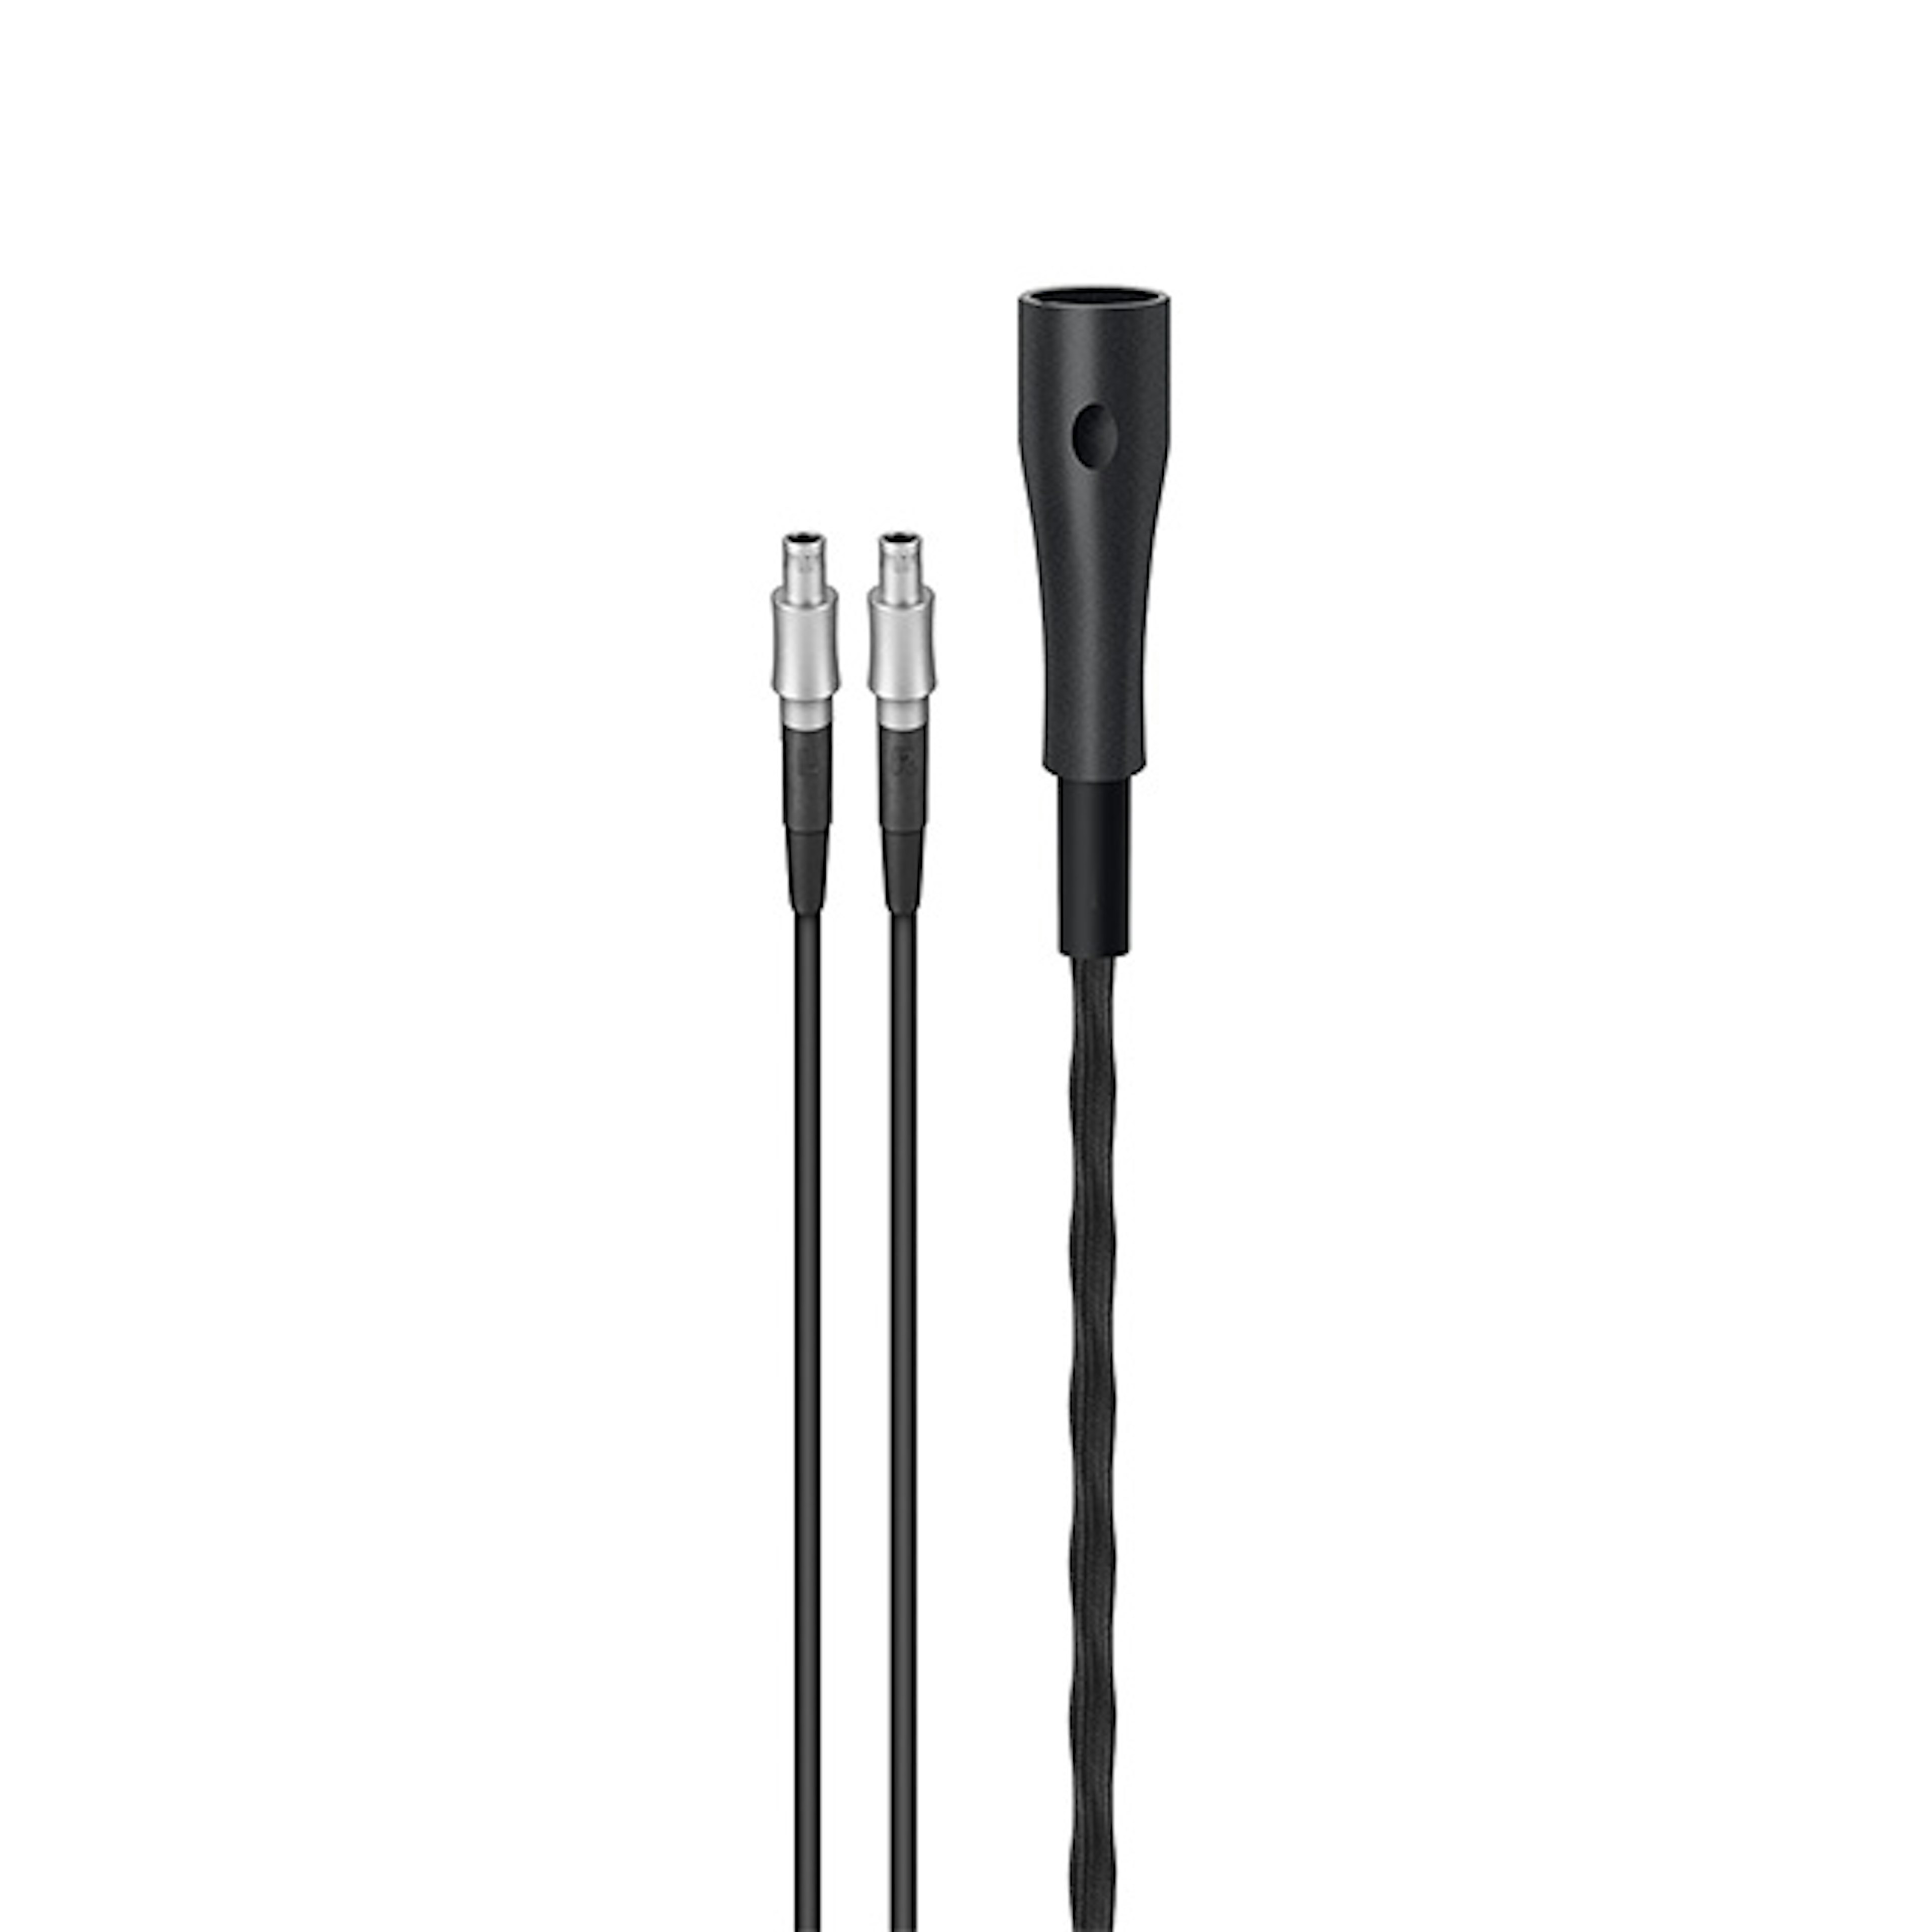 Cable 3m with plug ODU and XLR-4, black